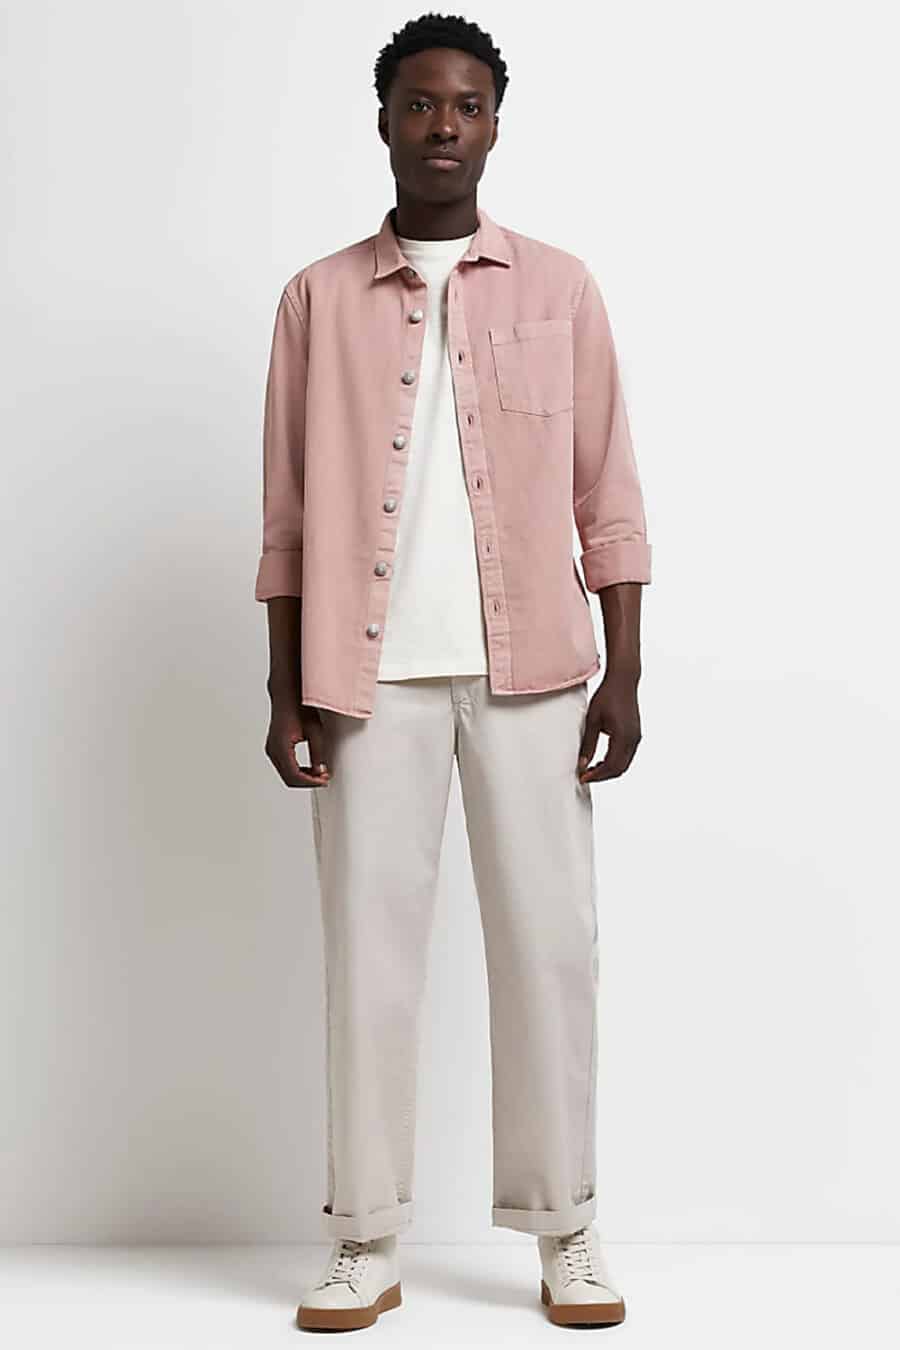 Men's wide leg grey chinos, white T-shirt, pink canvas overshirt and white sneakers outfit